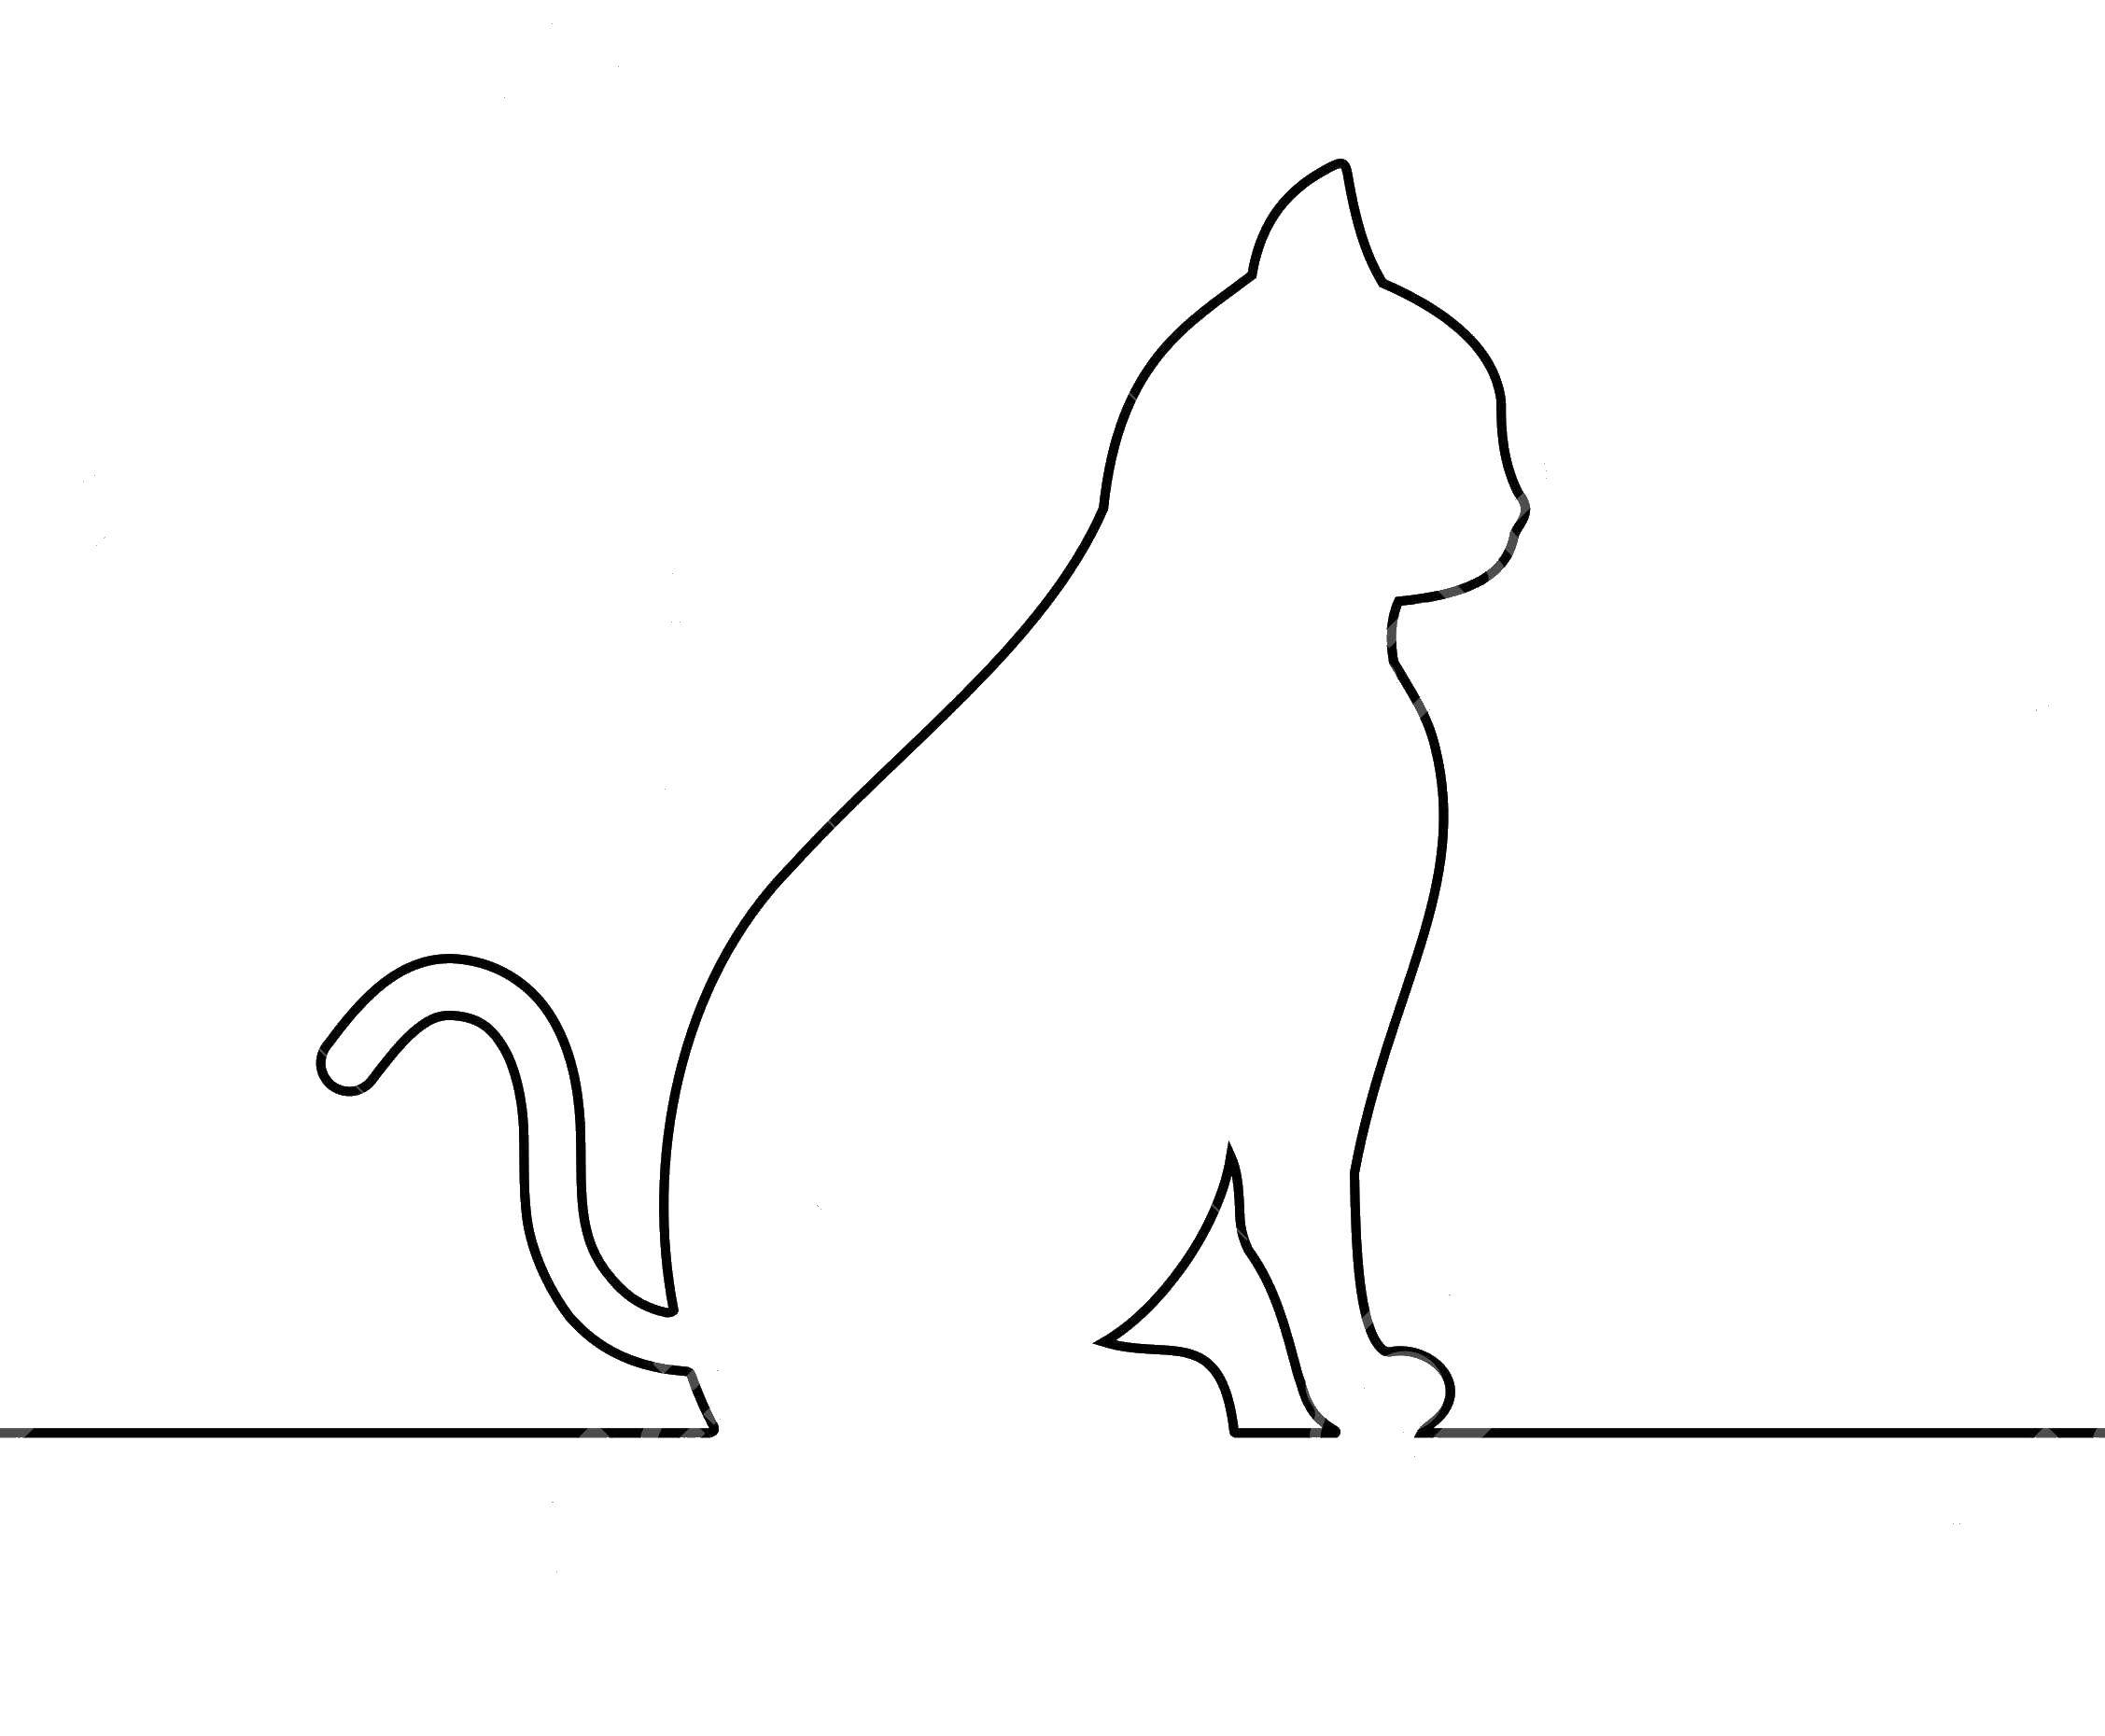 Coloring Contour cats. Category The contour of the cat to cut. Tags:  contour , cat, .